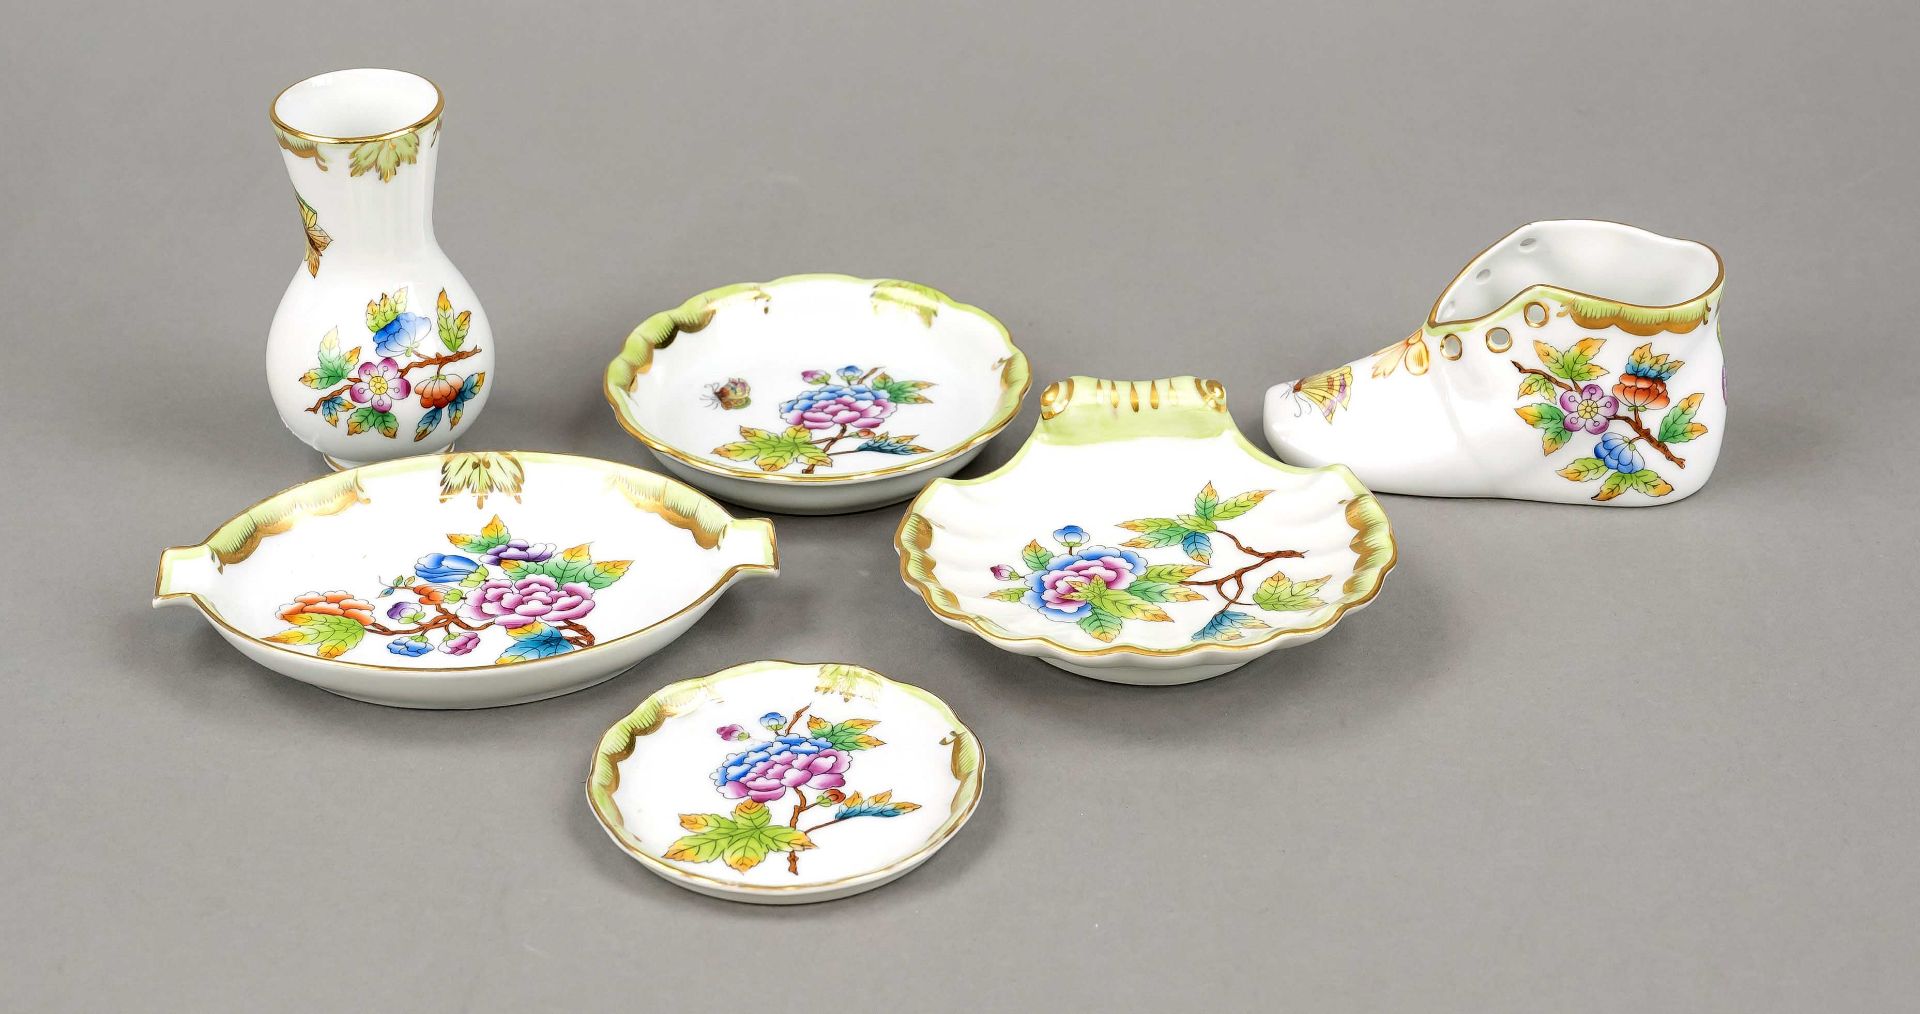 Six ornamental pieces, Herend, Hungary, early 20th century, polychrome painted and ornamental